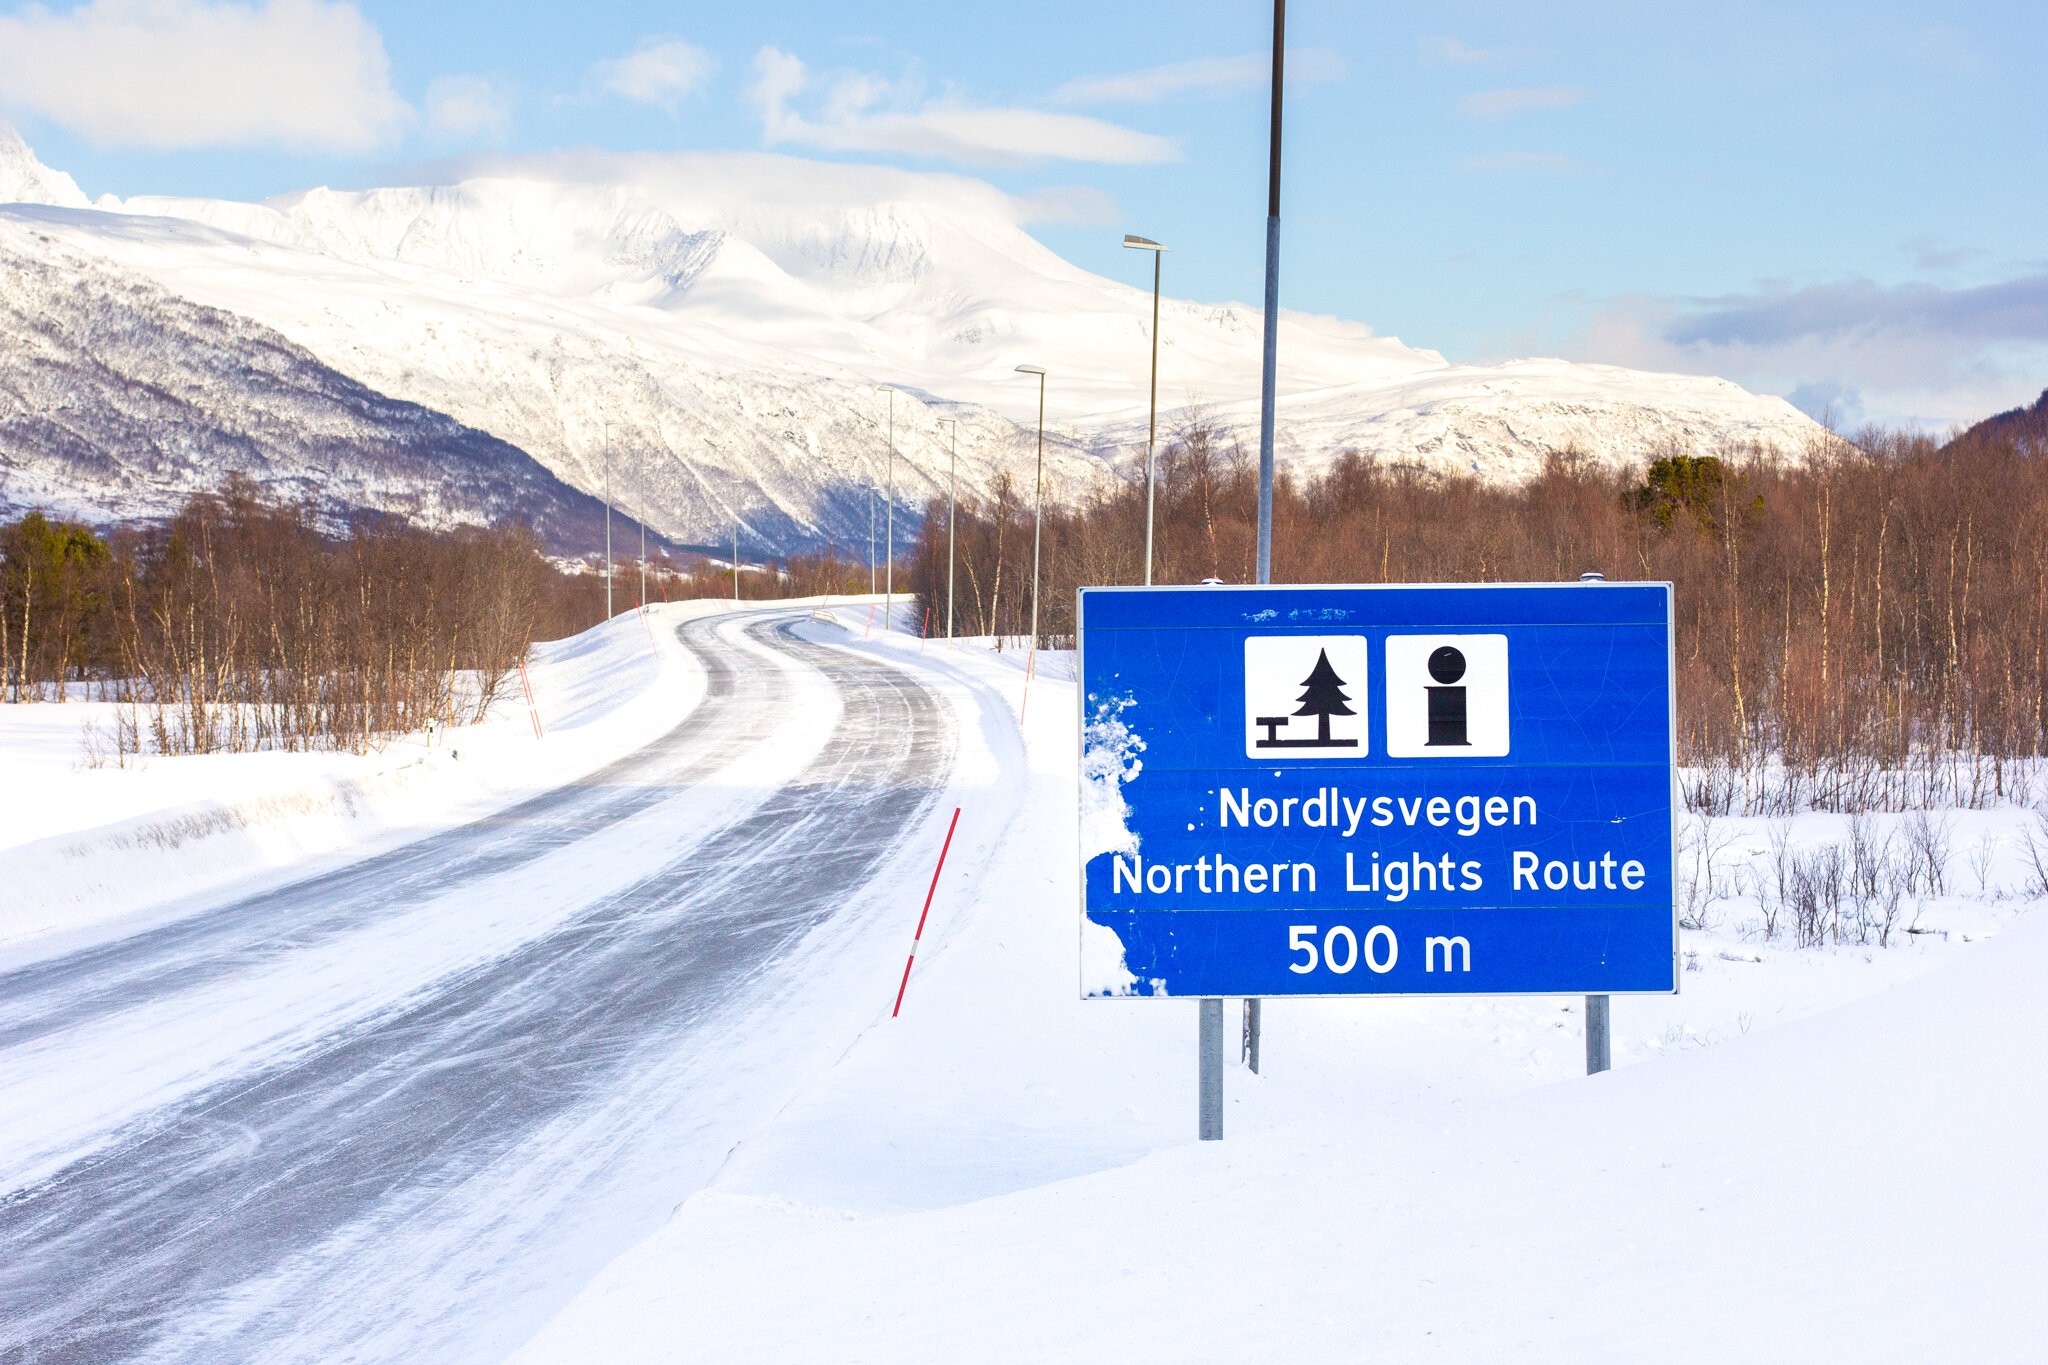 The Northern Lights Route